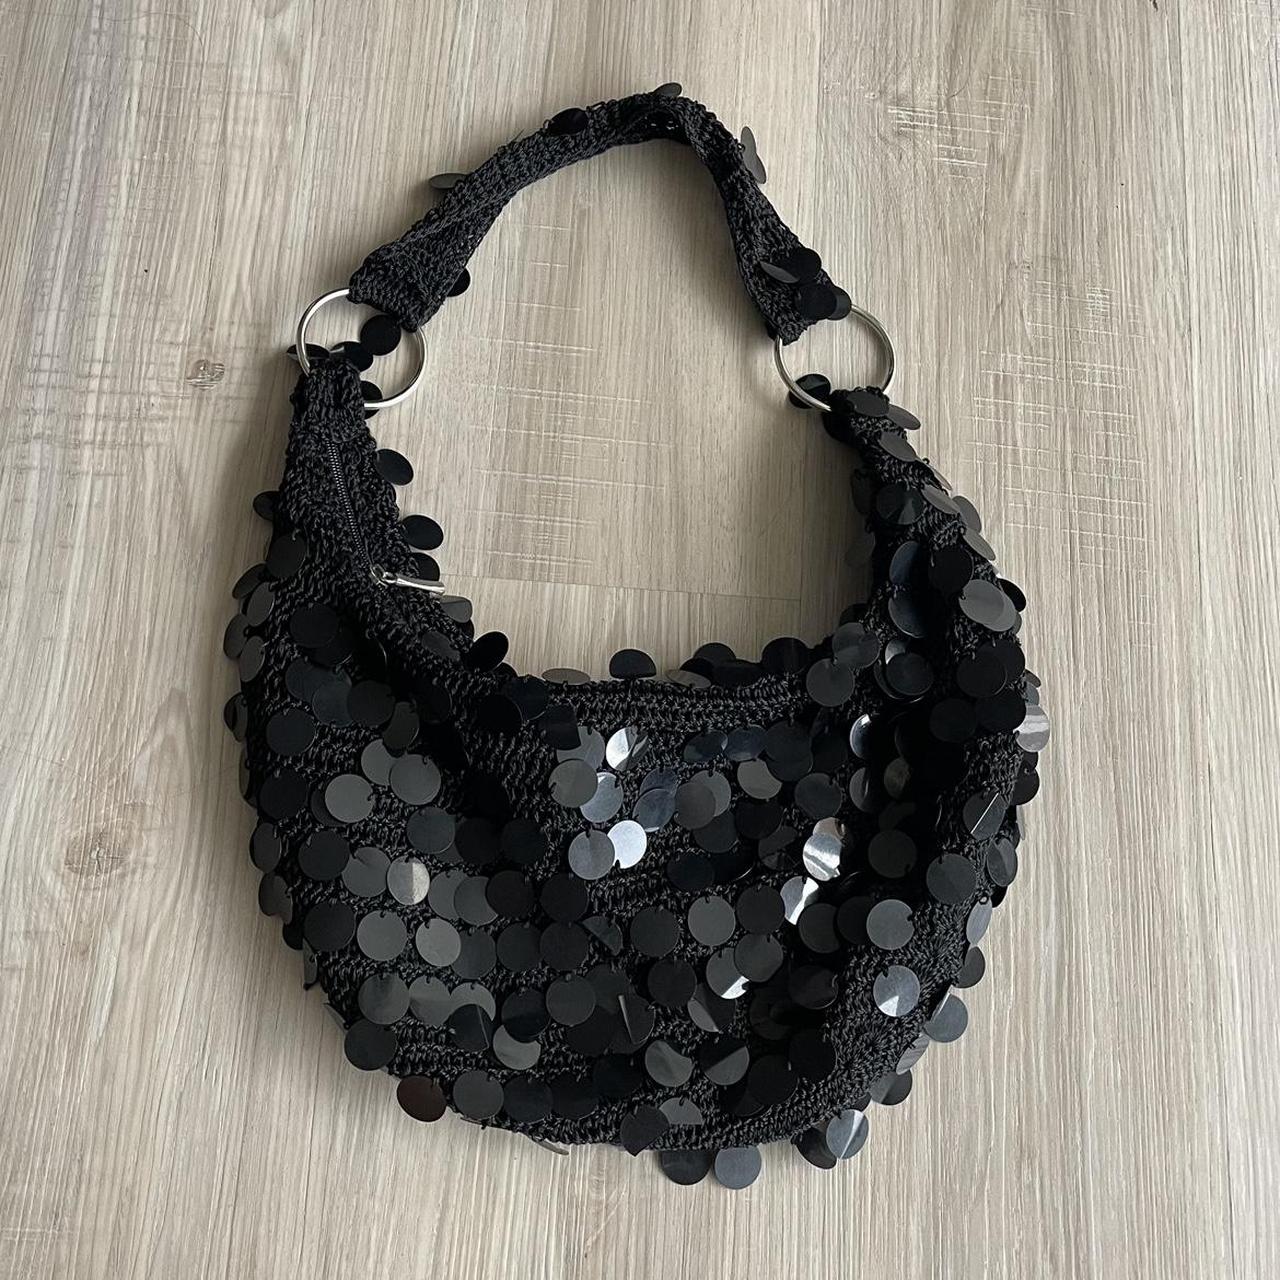 Lightweight,Business Casual Sequin Decor Hobo Bag, Perfect Bride Purse For  Wedding, Prom & Party Events Evening Bag,Dinner Bag  Glamorous,Elegant,Exquisite,Quiet Luxury Rhinestone For Party  Girl,Woman,Bride Perfect For Party,Dinner/Banquet,For Cocktail ...